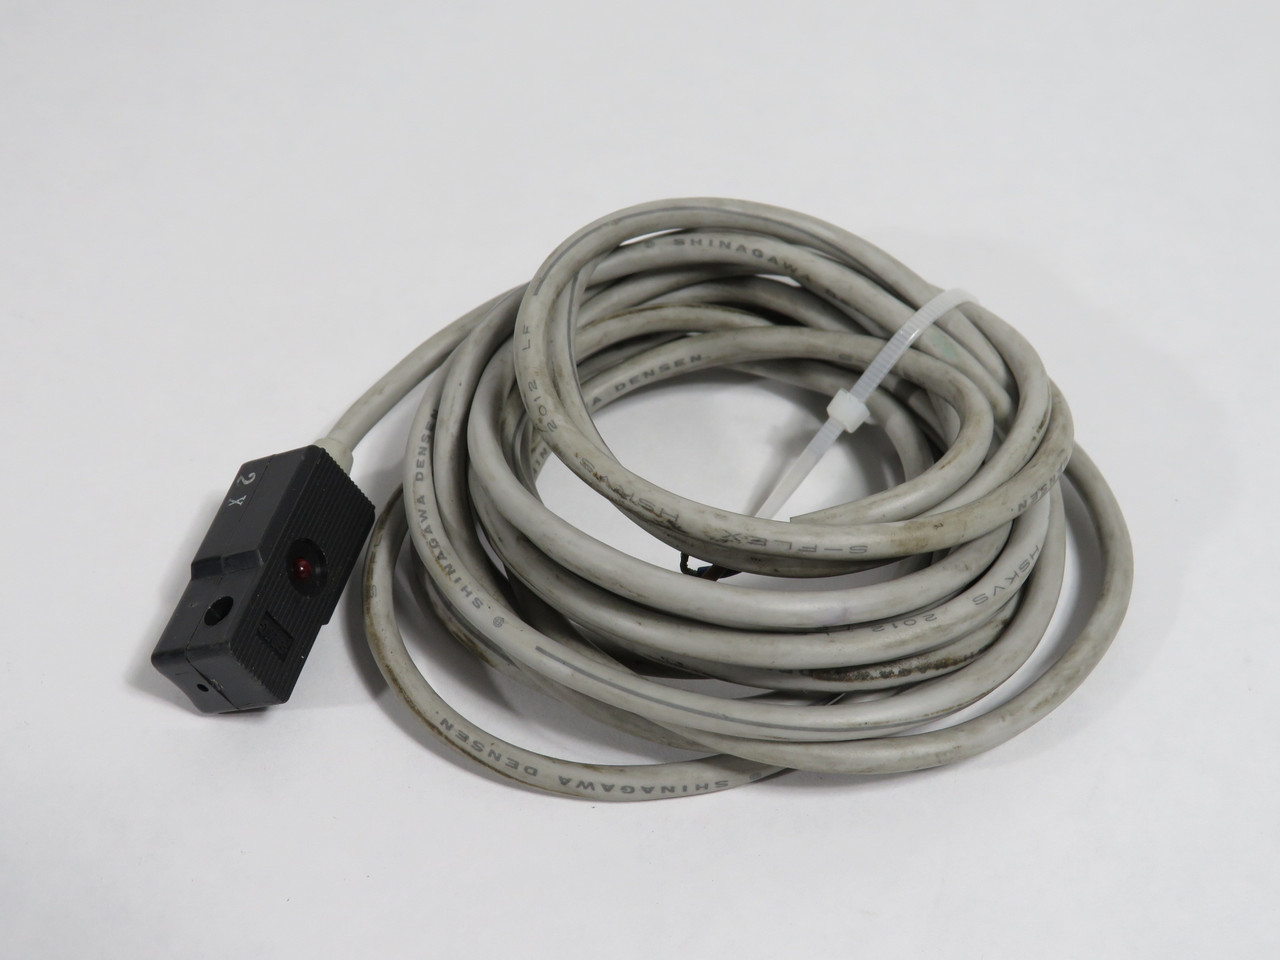 SMC D-B53 (D-B57) Reed Switch with Indicator 24VDC 5-50mA 3m STAINED CABLE USED